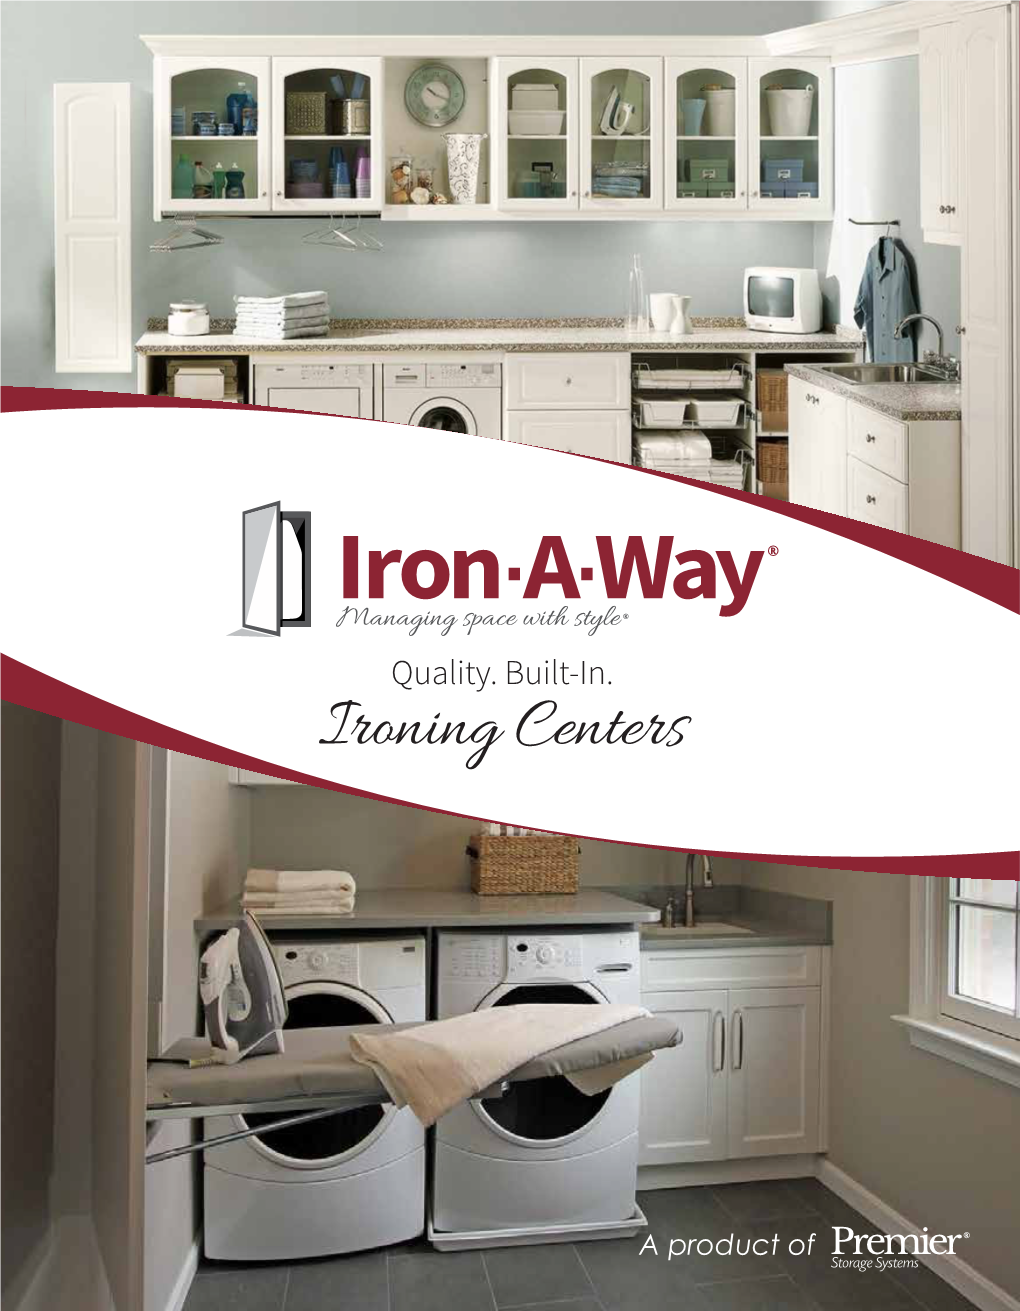 Ironing Centers for More Than 60 Years, We’Ve Been Leading the Market with Quality, Built-In Ironing Centers, Helping You Manage Space with Grace and Style